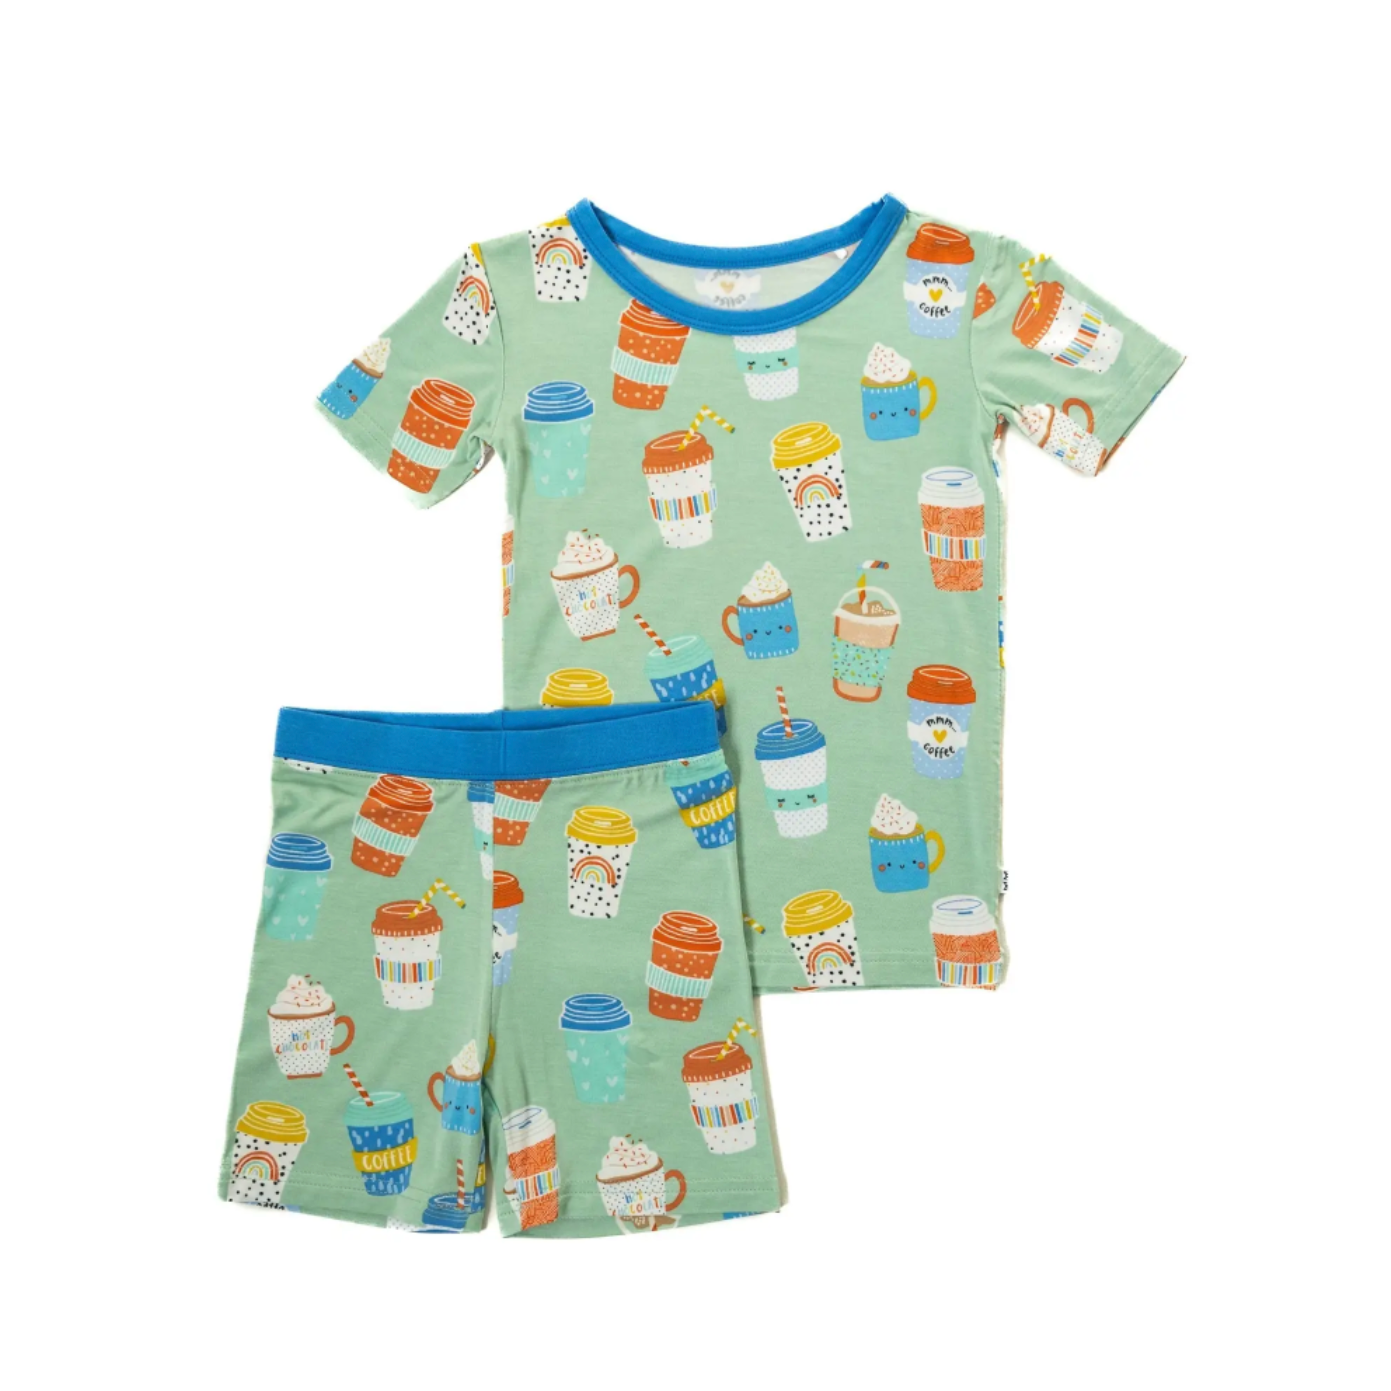 "i love you a latte" s/s and shorts two-piece bamboo viscose pajama set in aqua